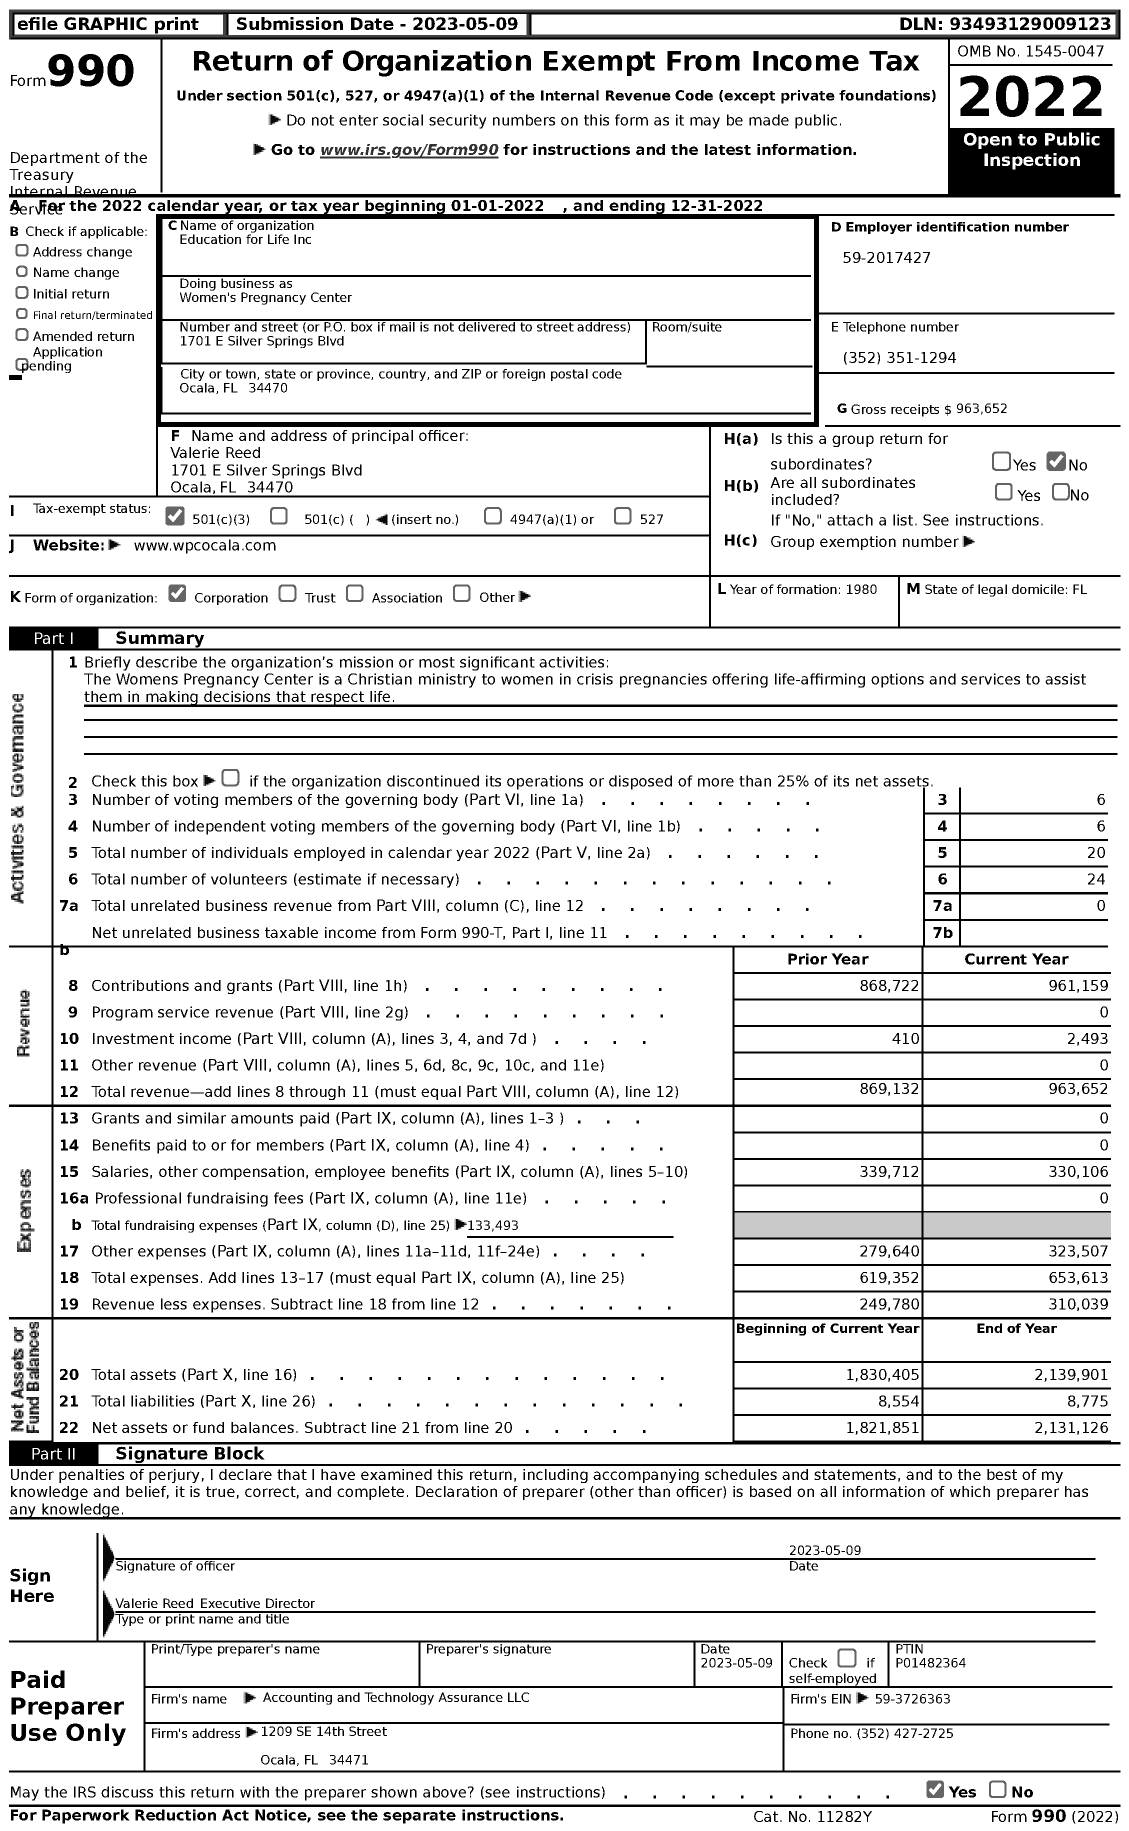 Image of first page of 2022 Form 990 for Education for Life / Women's Pregnancy Center